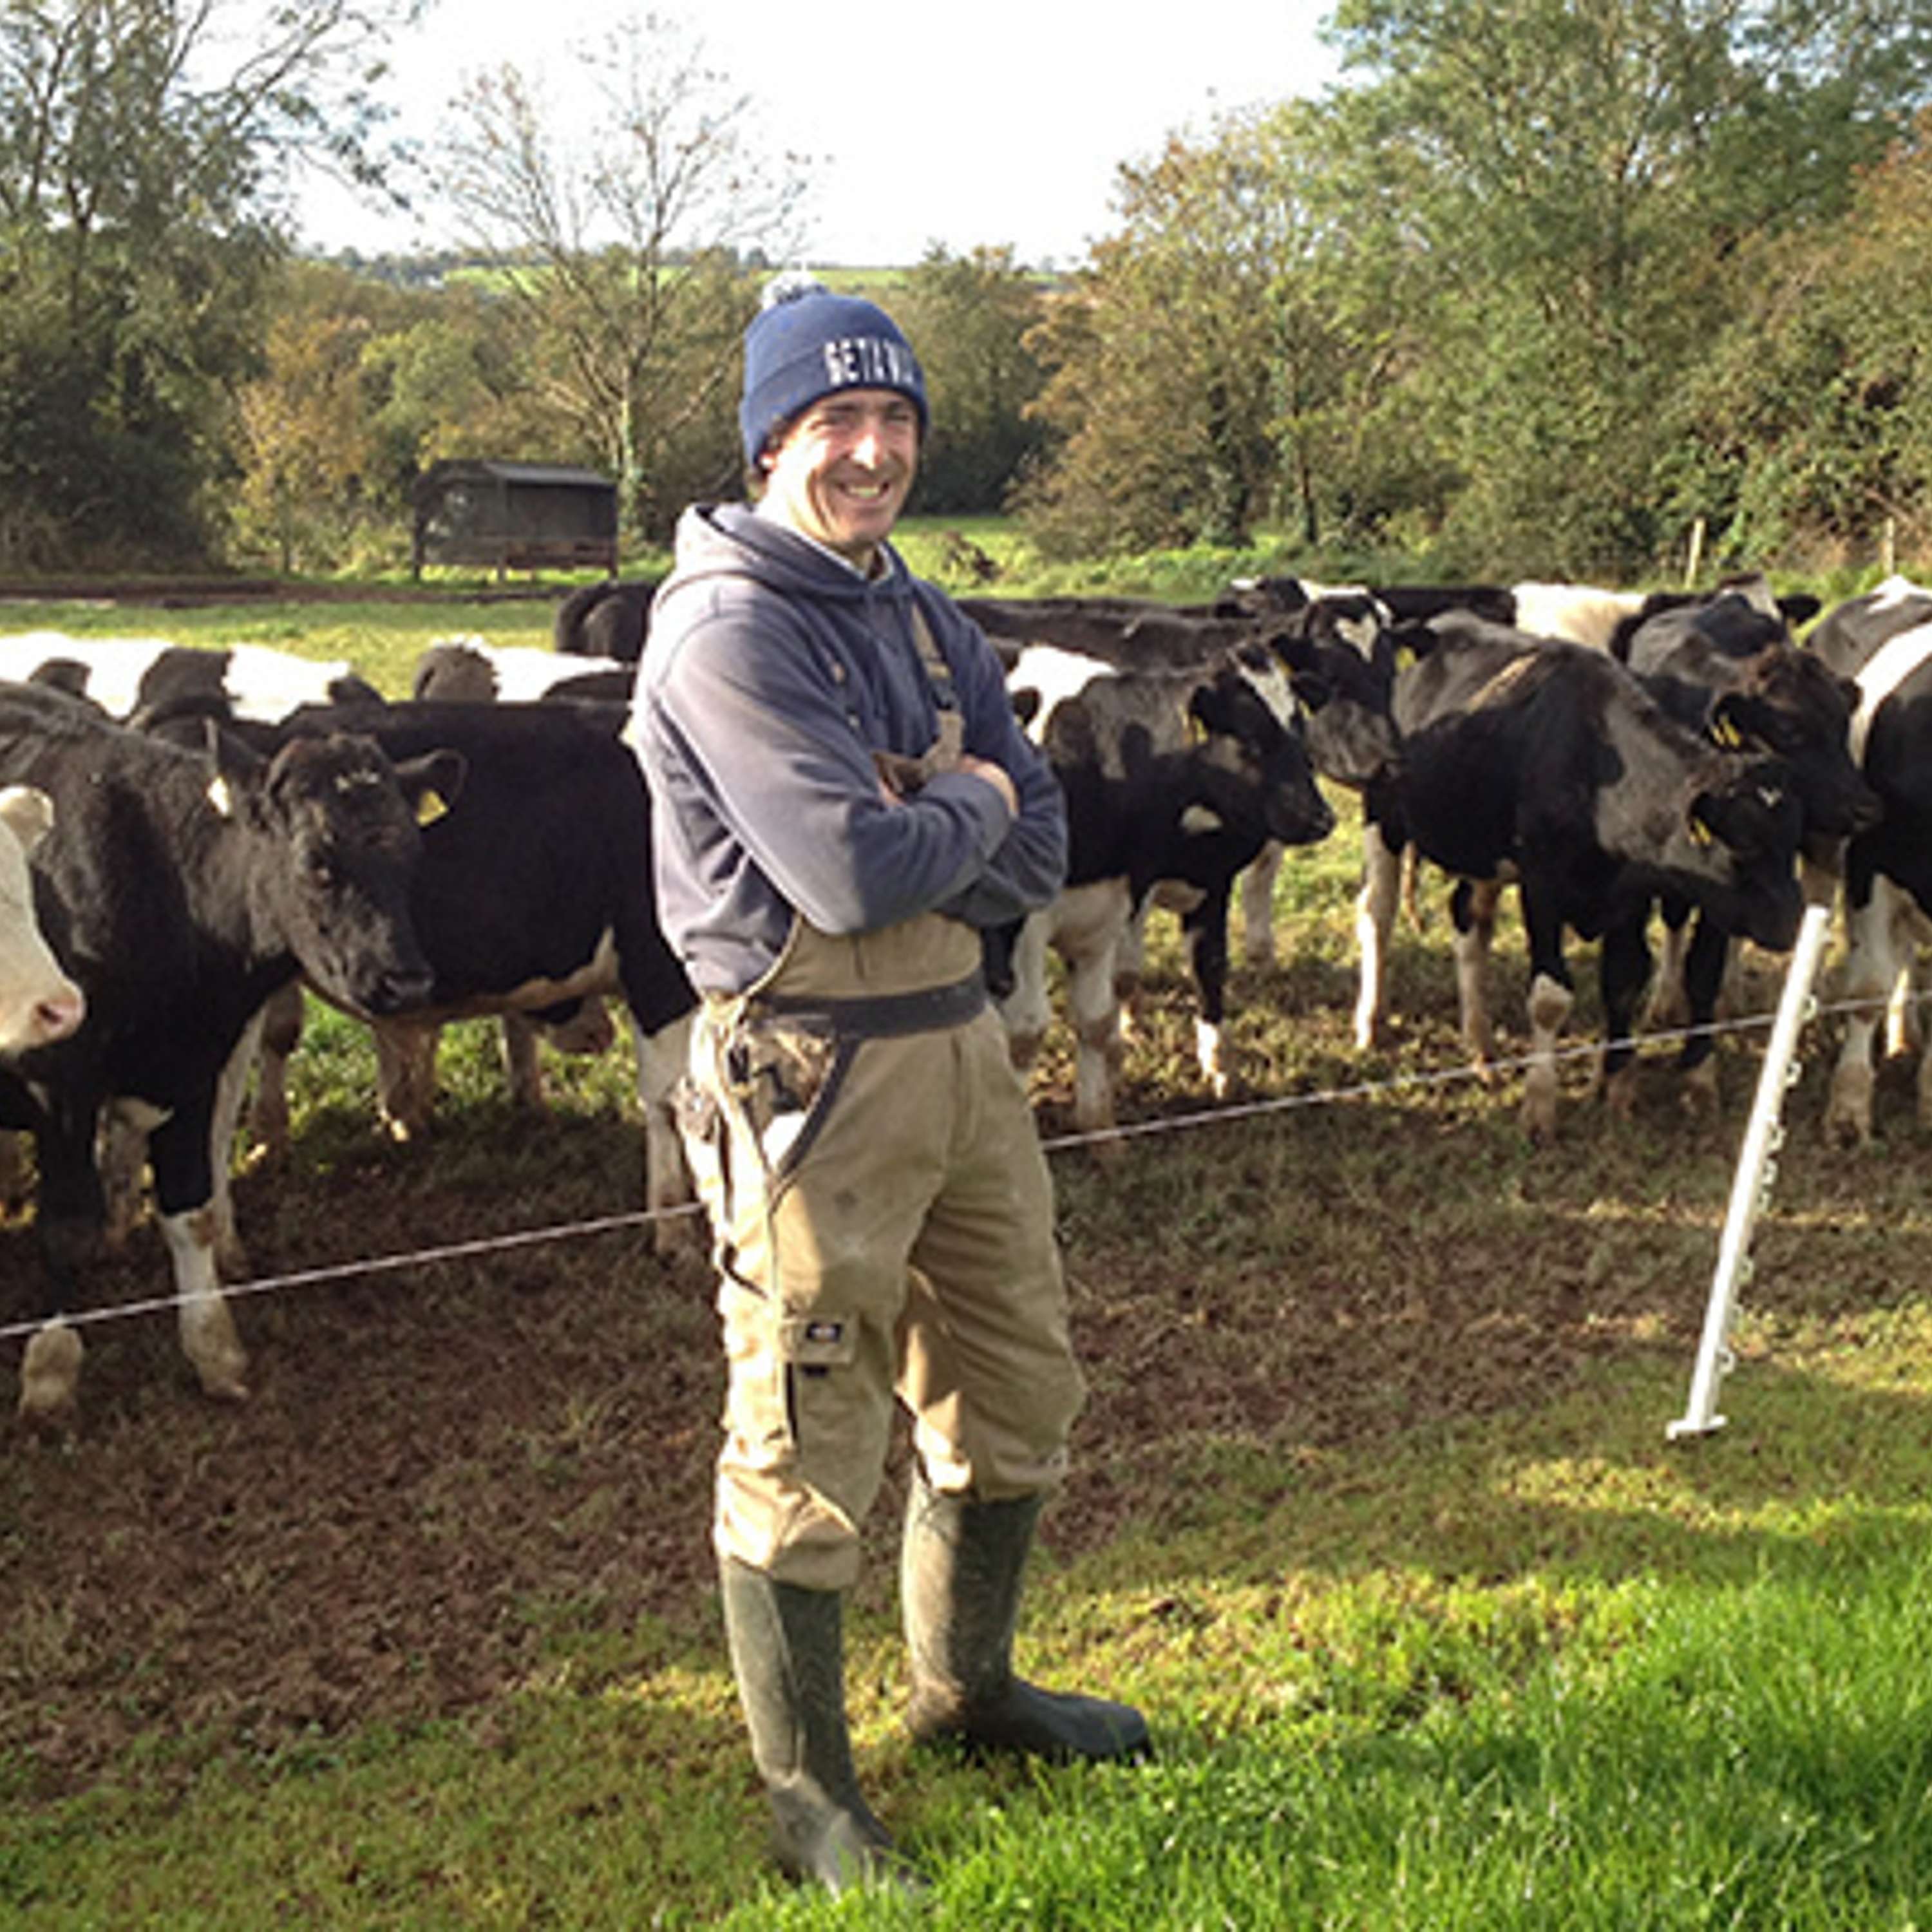 DairyBeef 500 farmer, Pat Collins, on his dairy calf-to-beef system